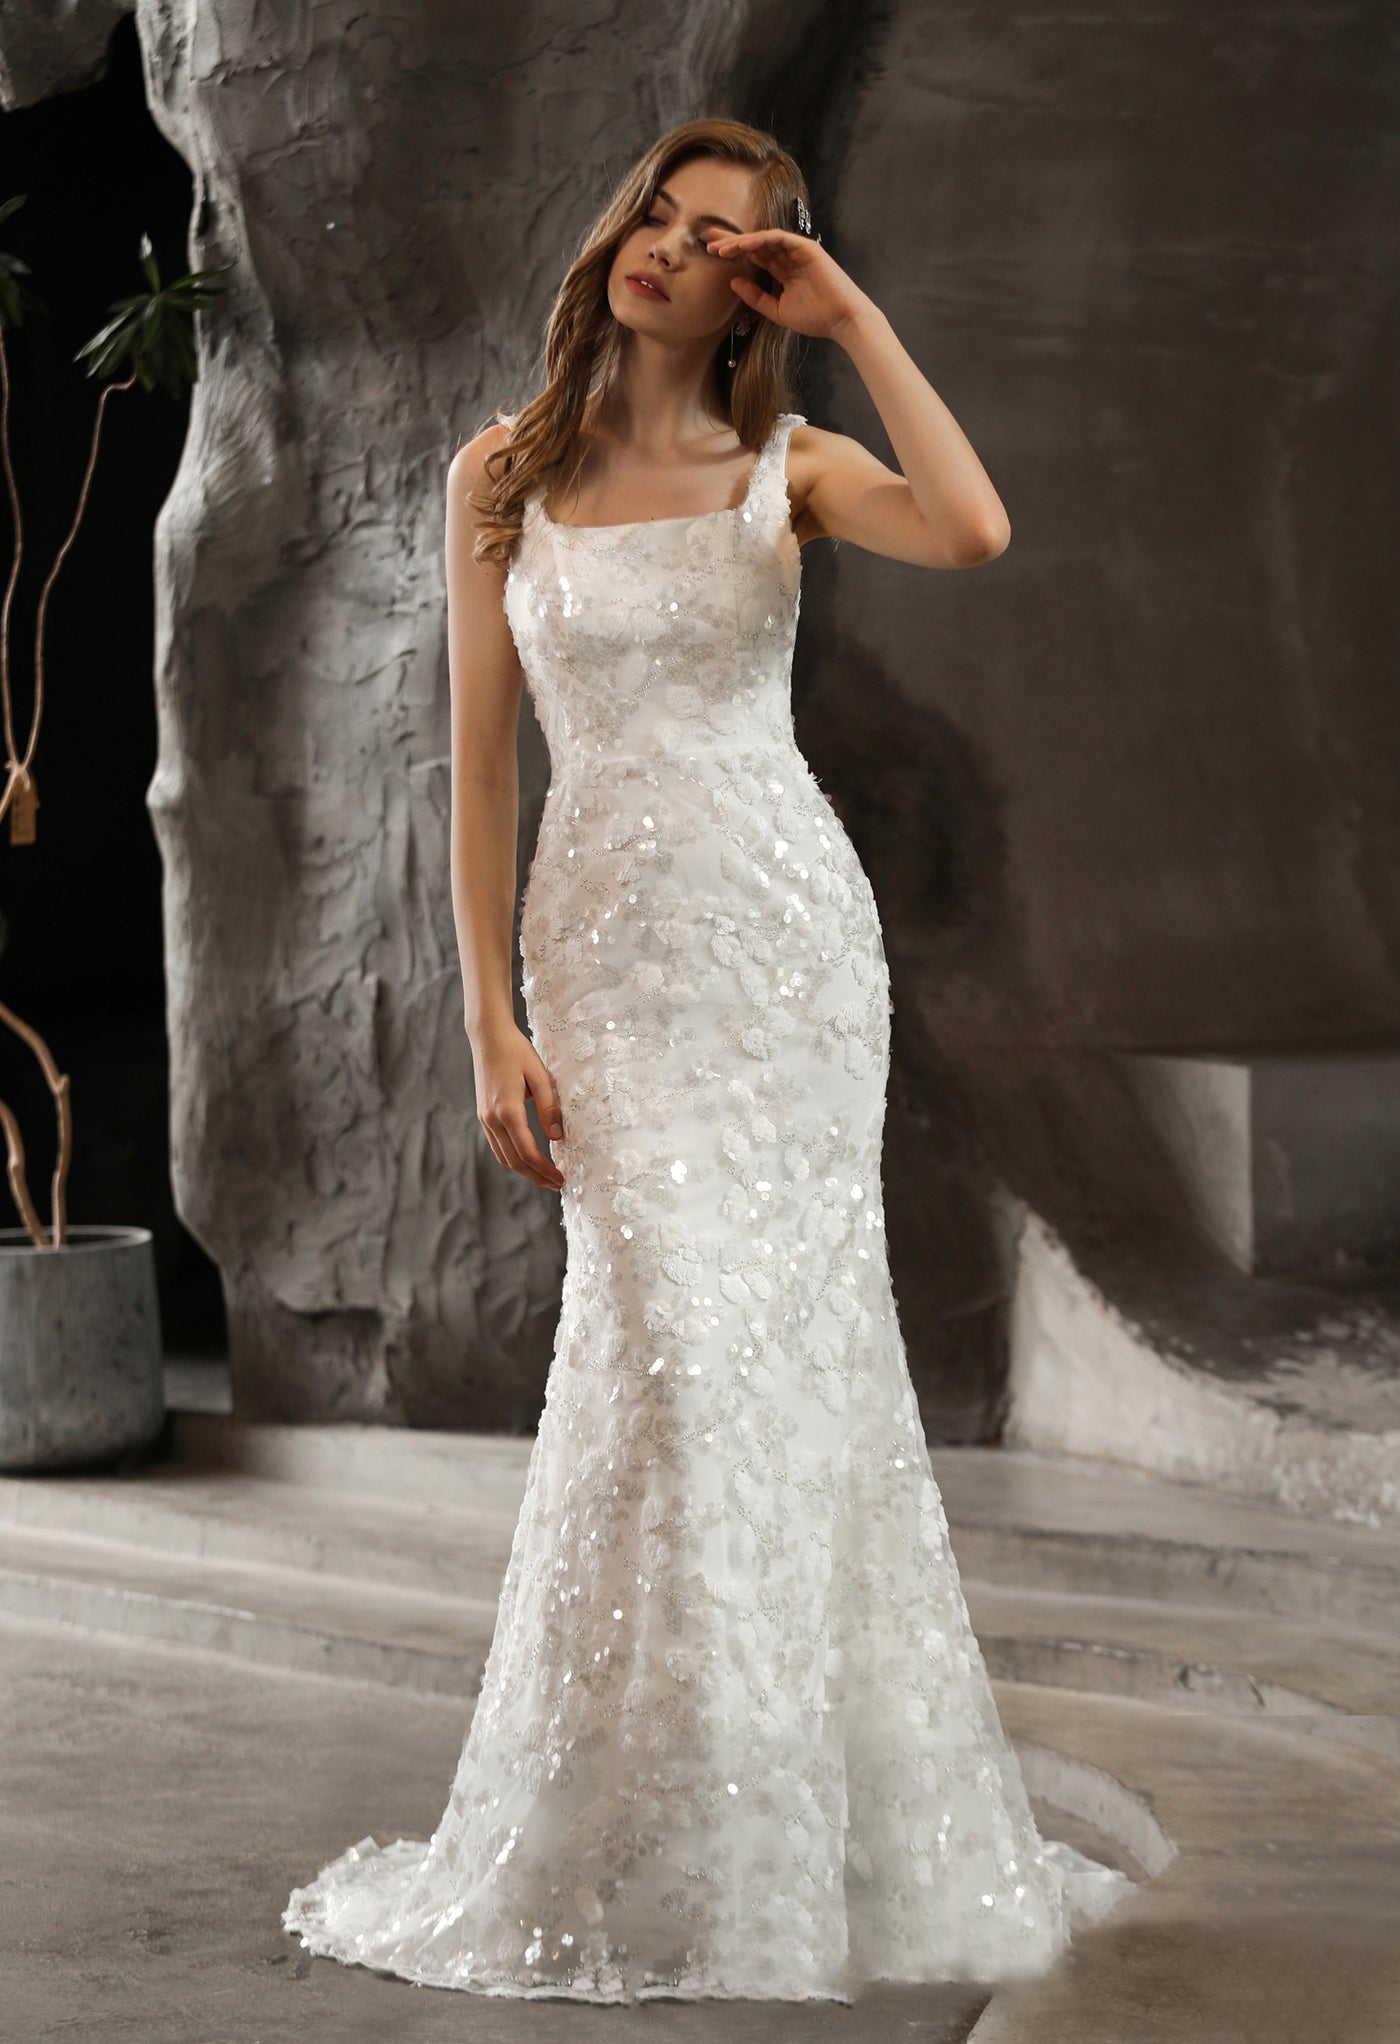 A woman posing in an elegant white Sequined Lace Square Neckline Sheath Wedding Dress by Bergamot Bridal.